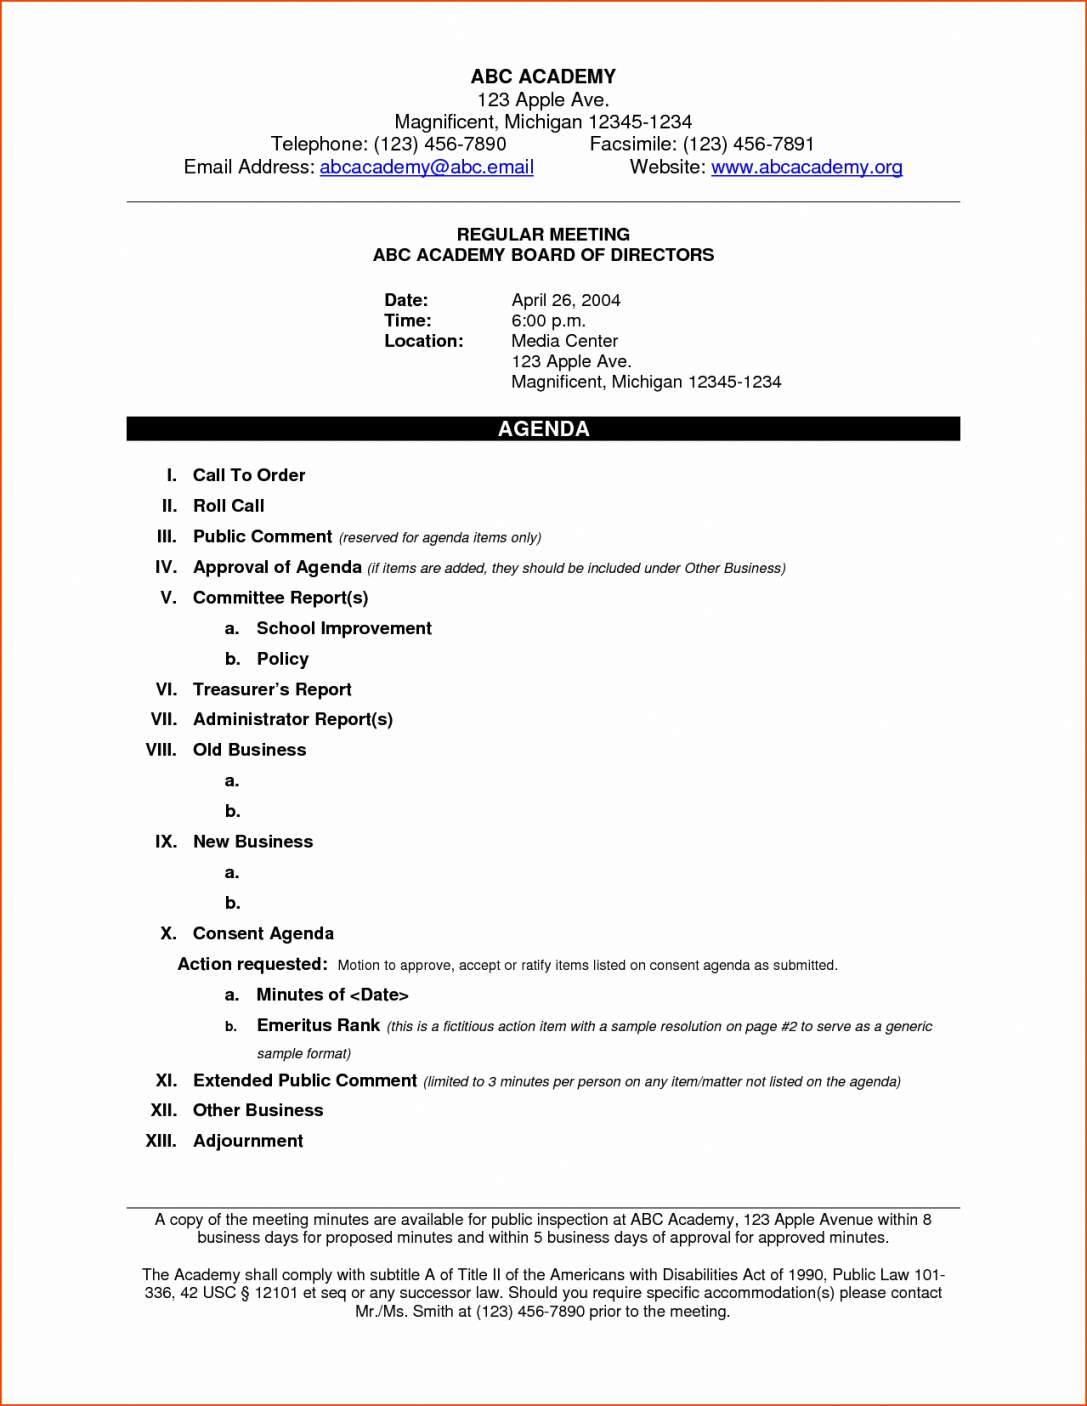 Agenda Format For A Meeting Sample Template Sufficient With Save inside Consent Agenda Template